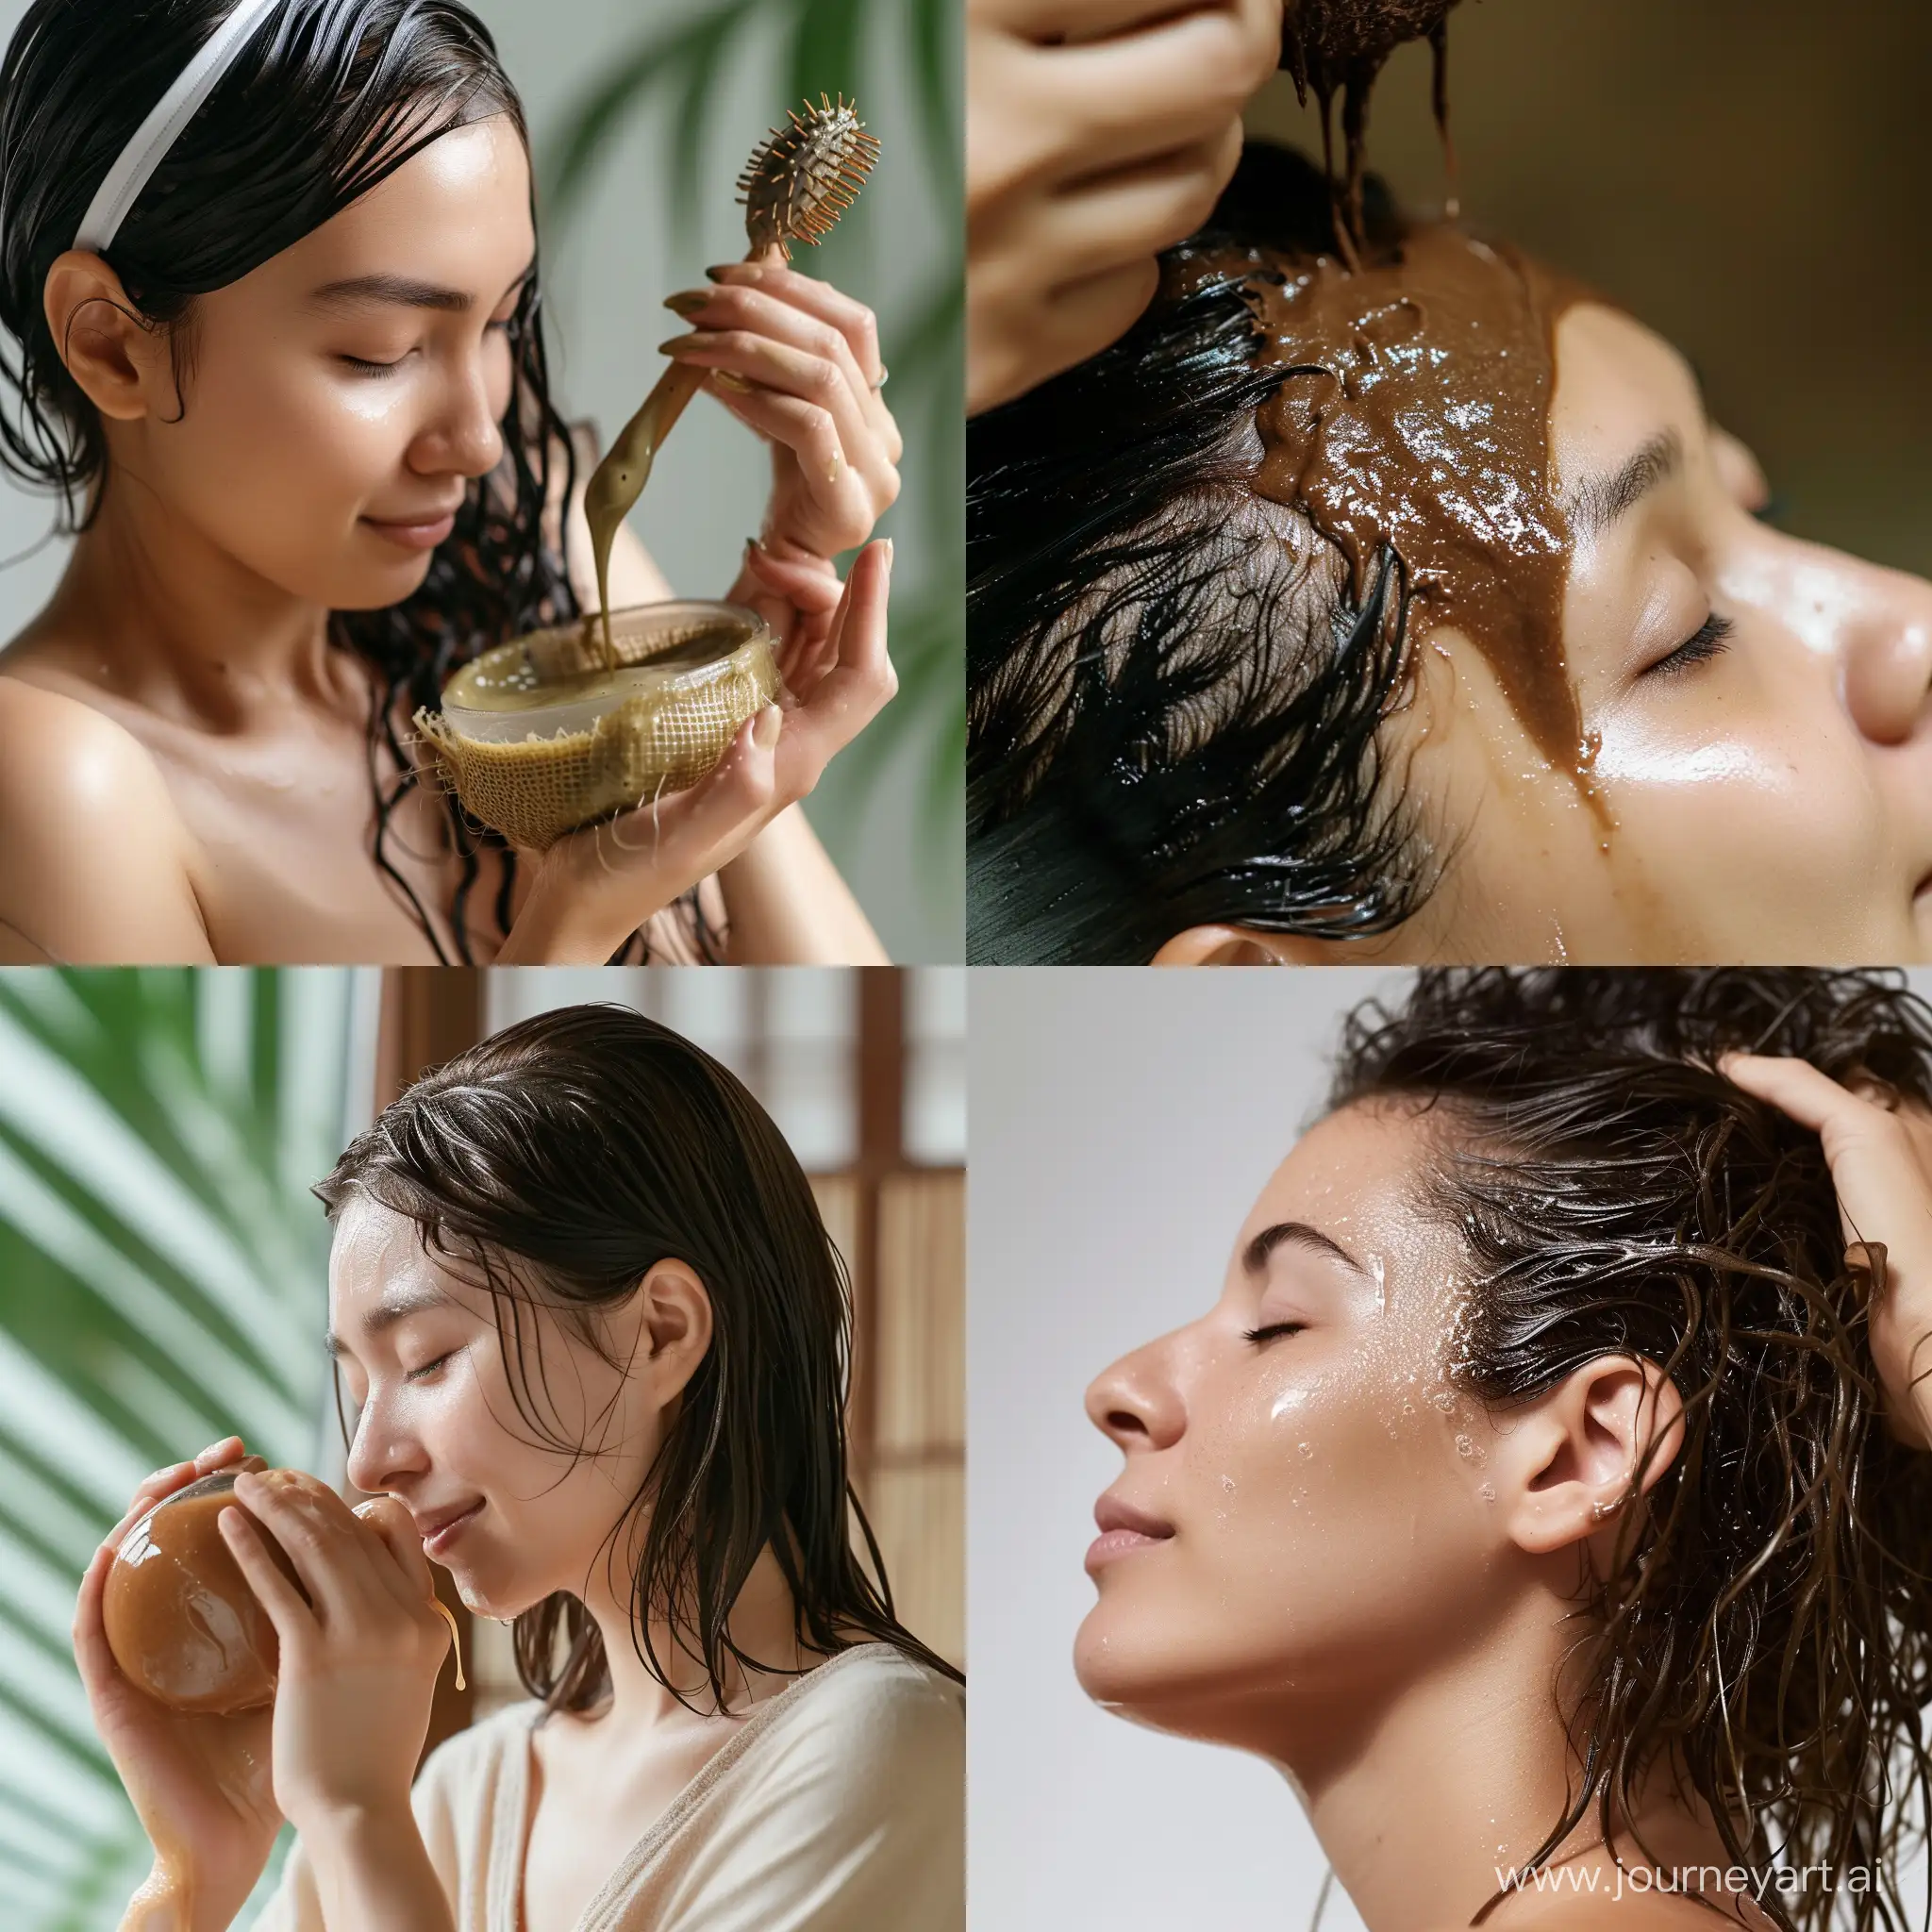 Real and natural photo of a woman using masa tea as shampoo. All details are accurate and complete